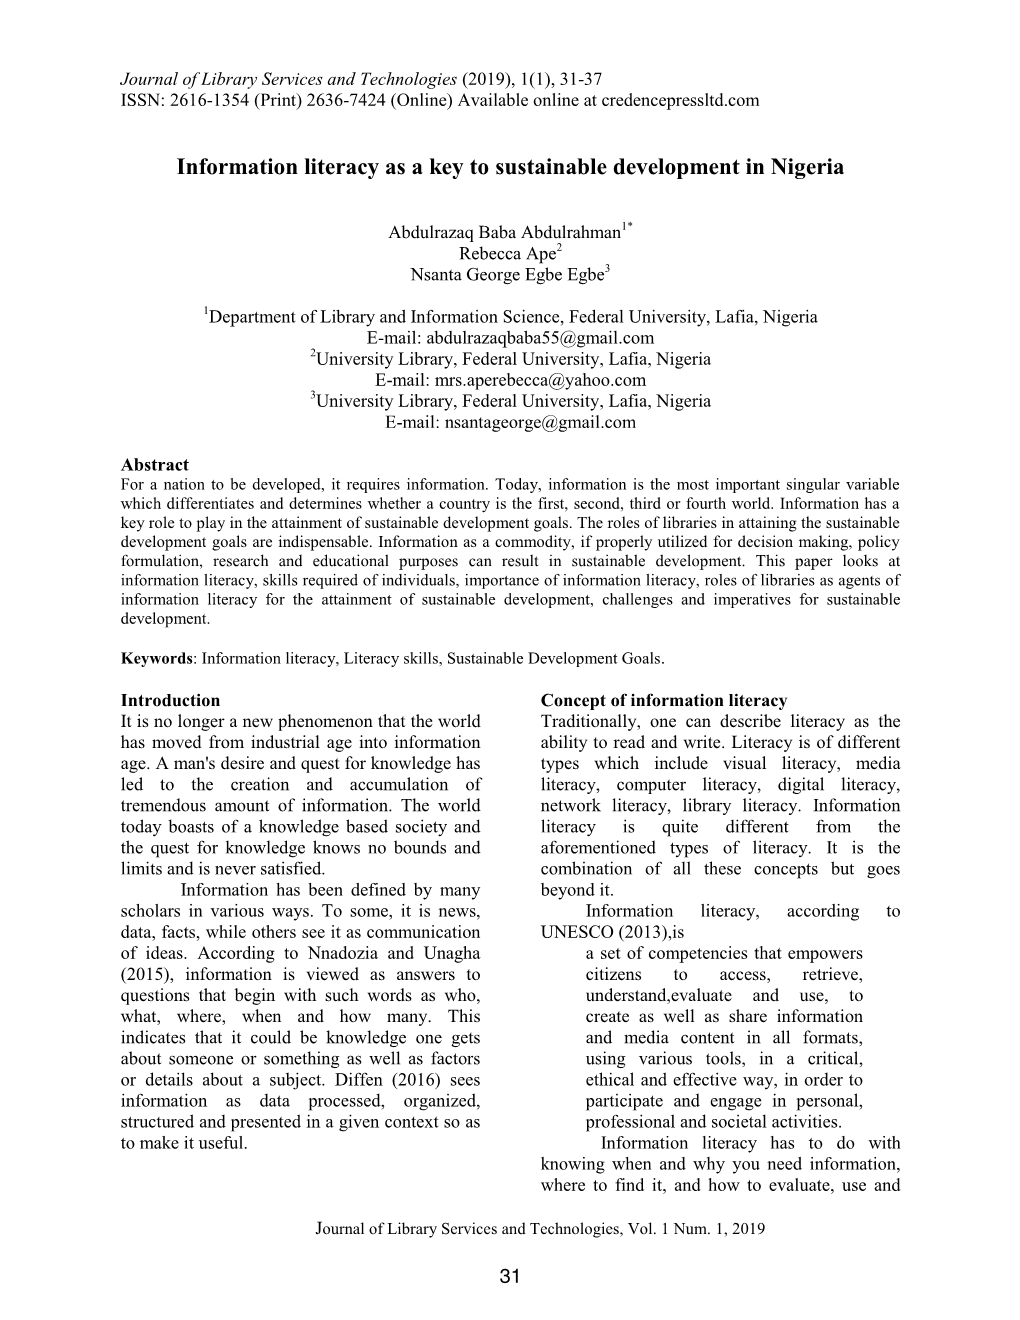 Information Literacy As a Key to Sustainable Development in Nigeria